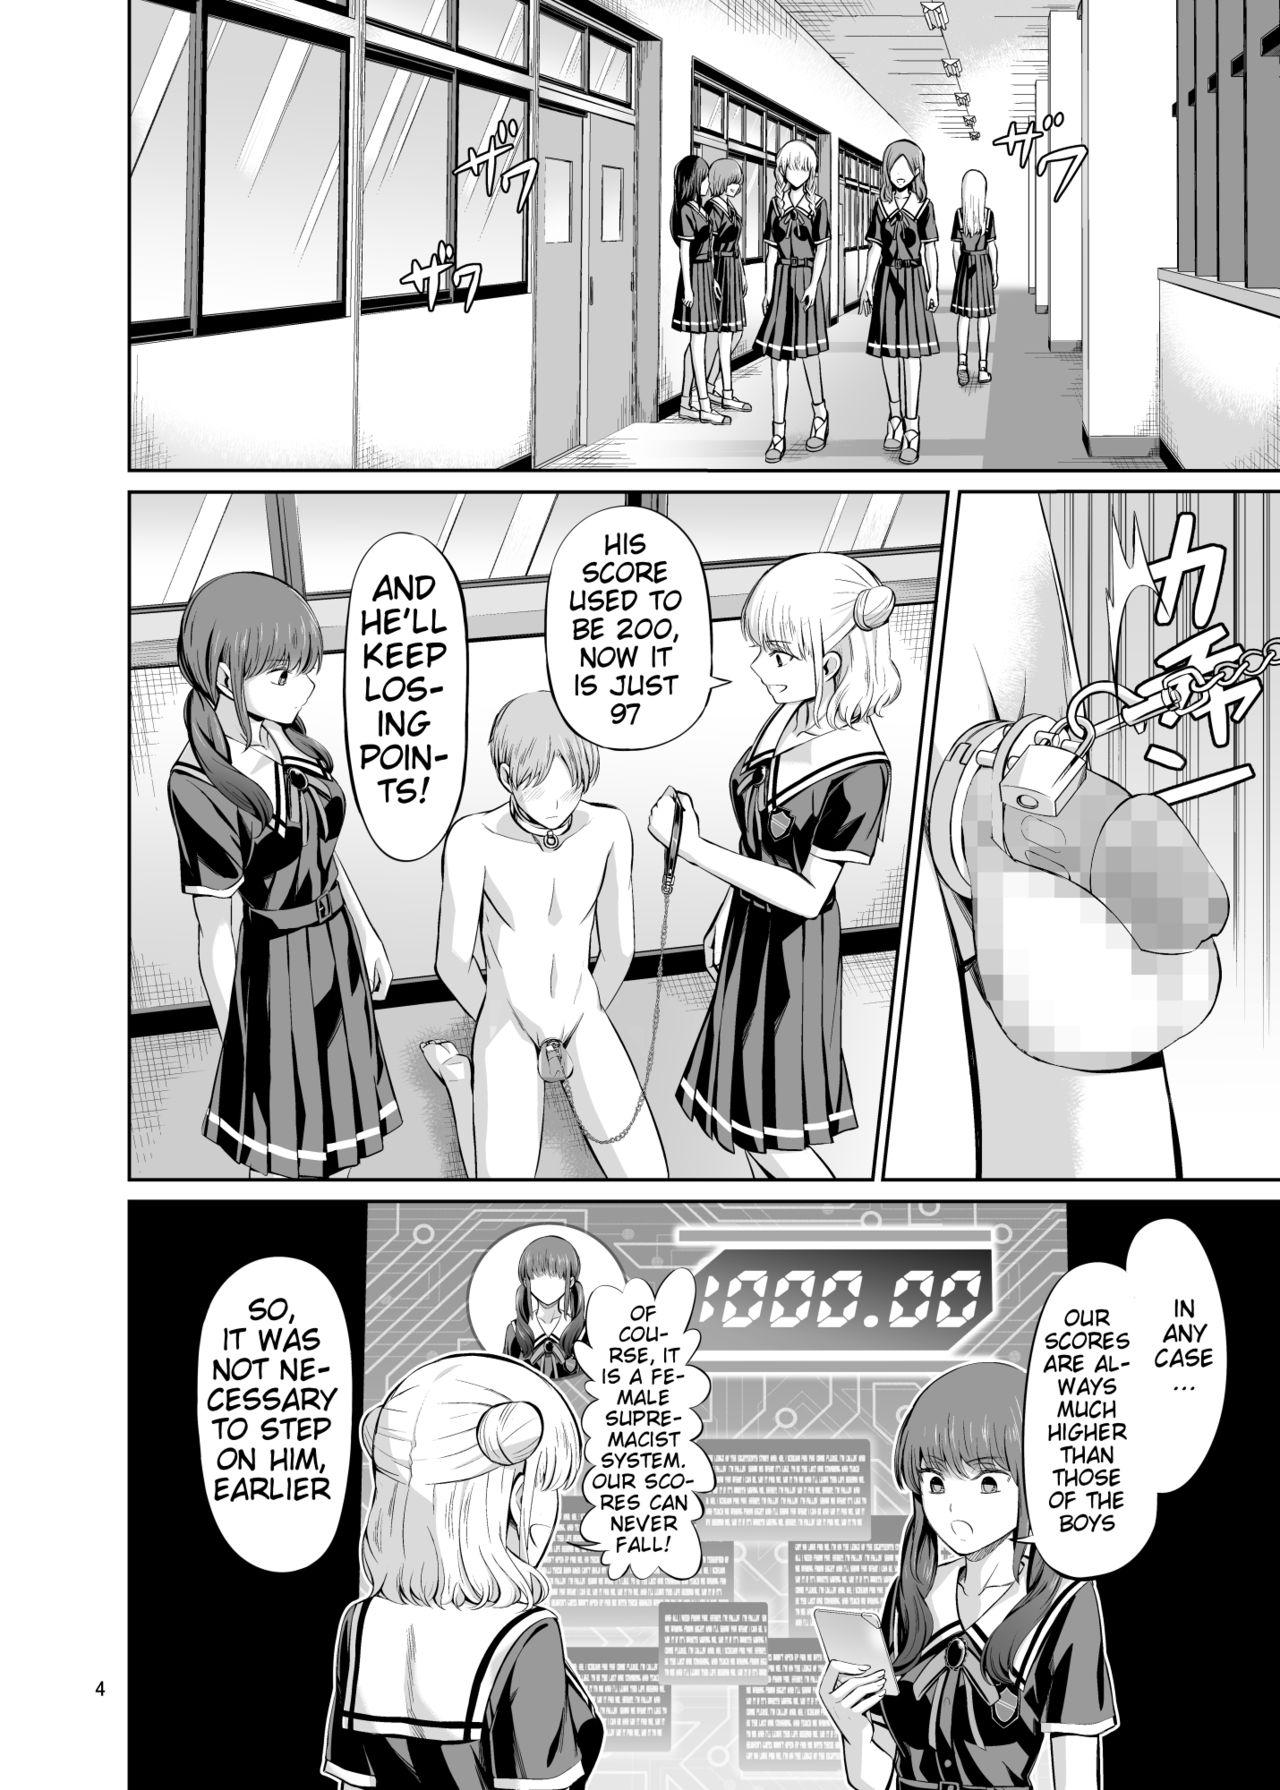 Full Tensoushugi no Kuni Kouhen | A Country Based on Point System, Second Part - Original One - Page 6